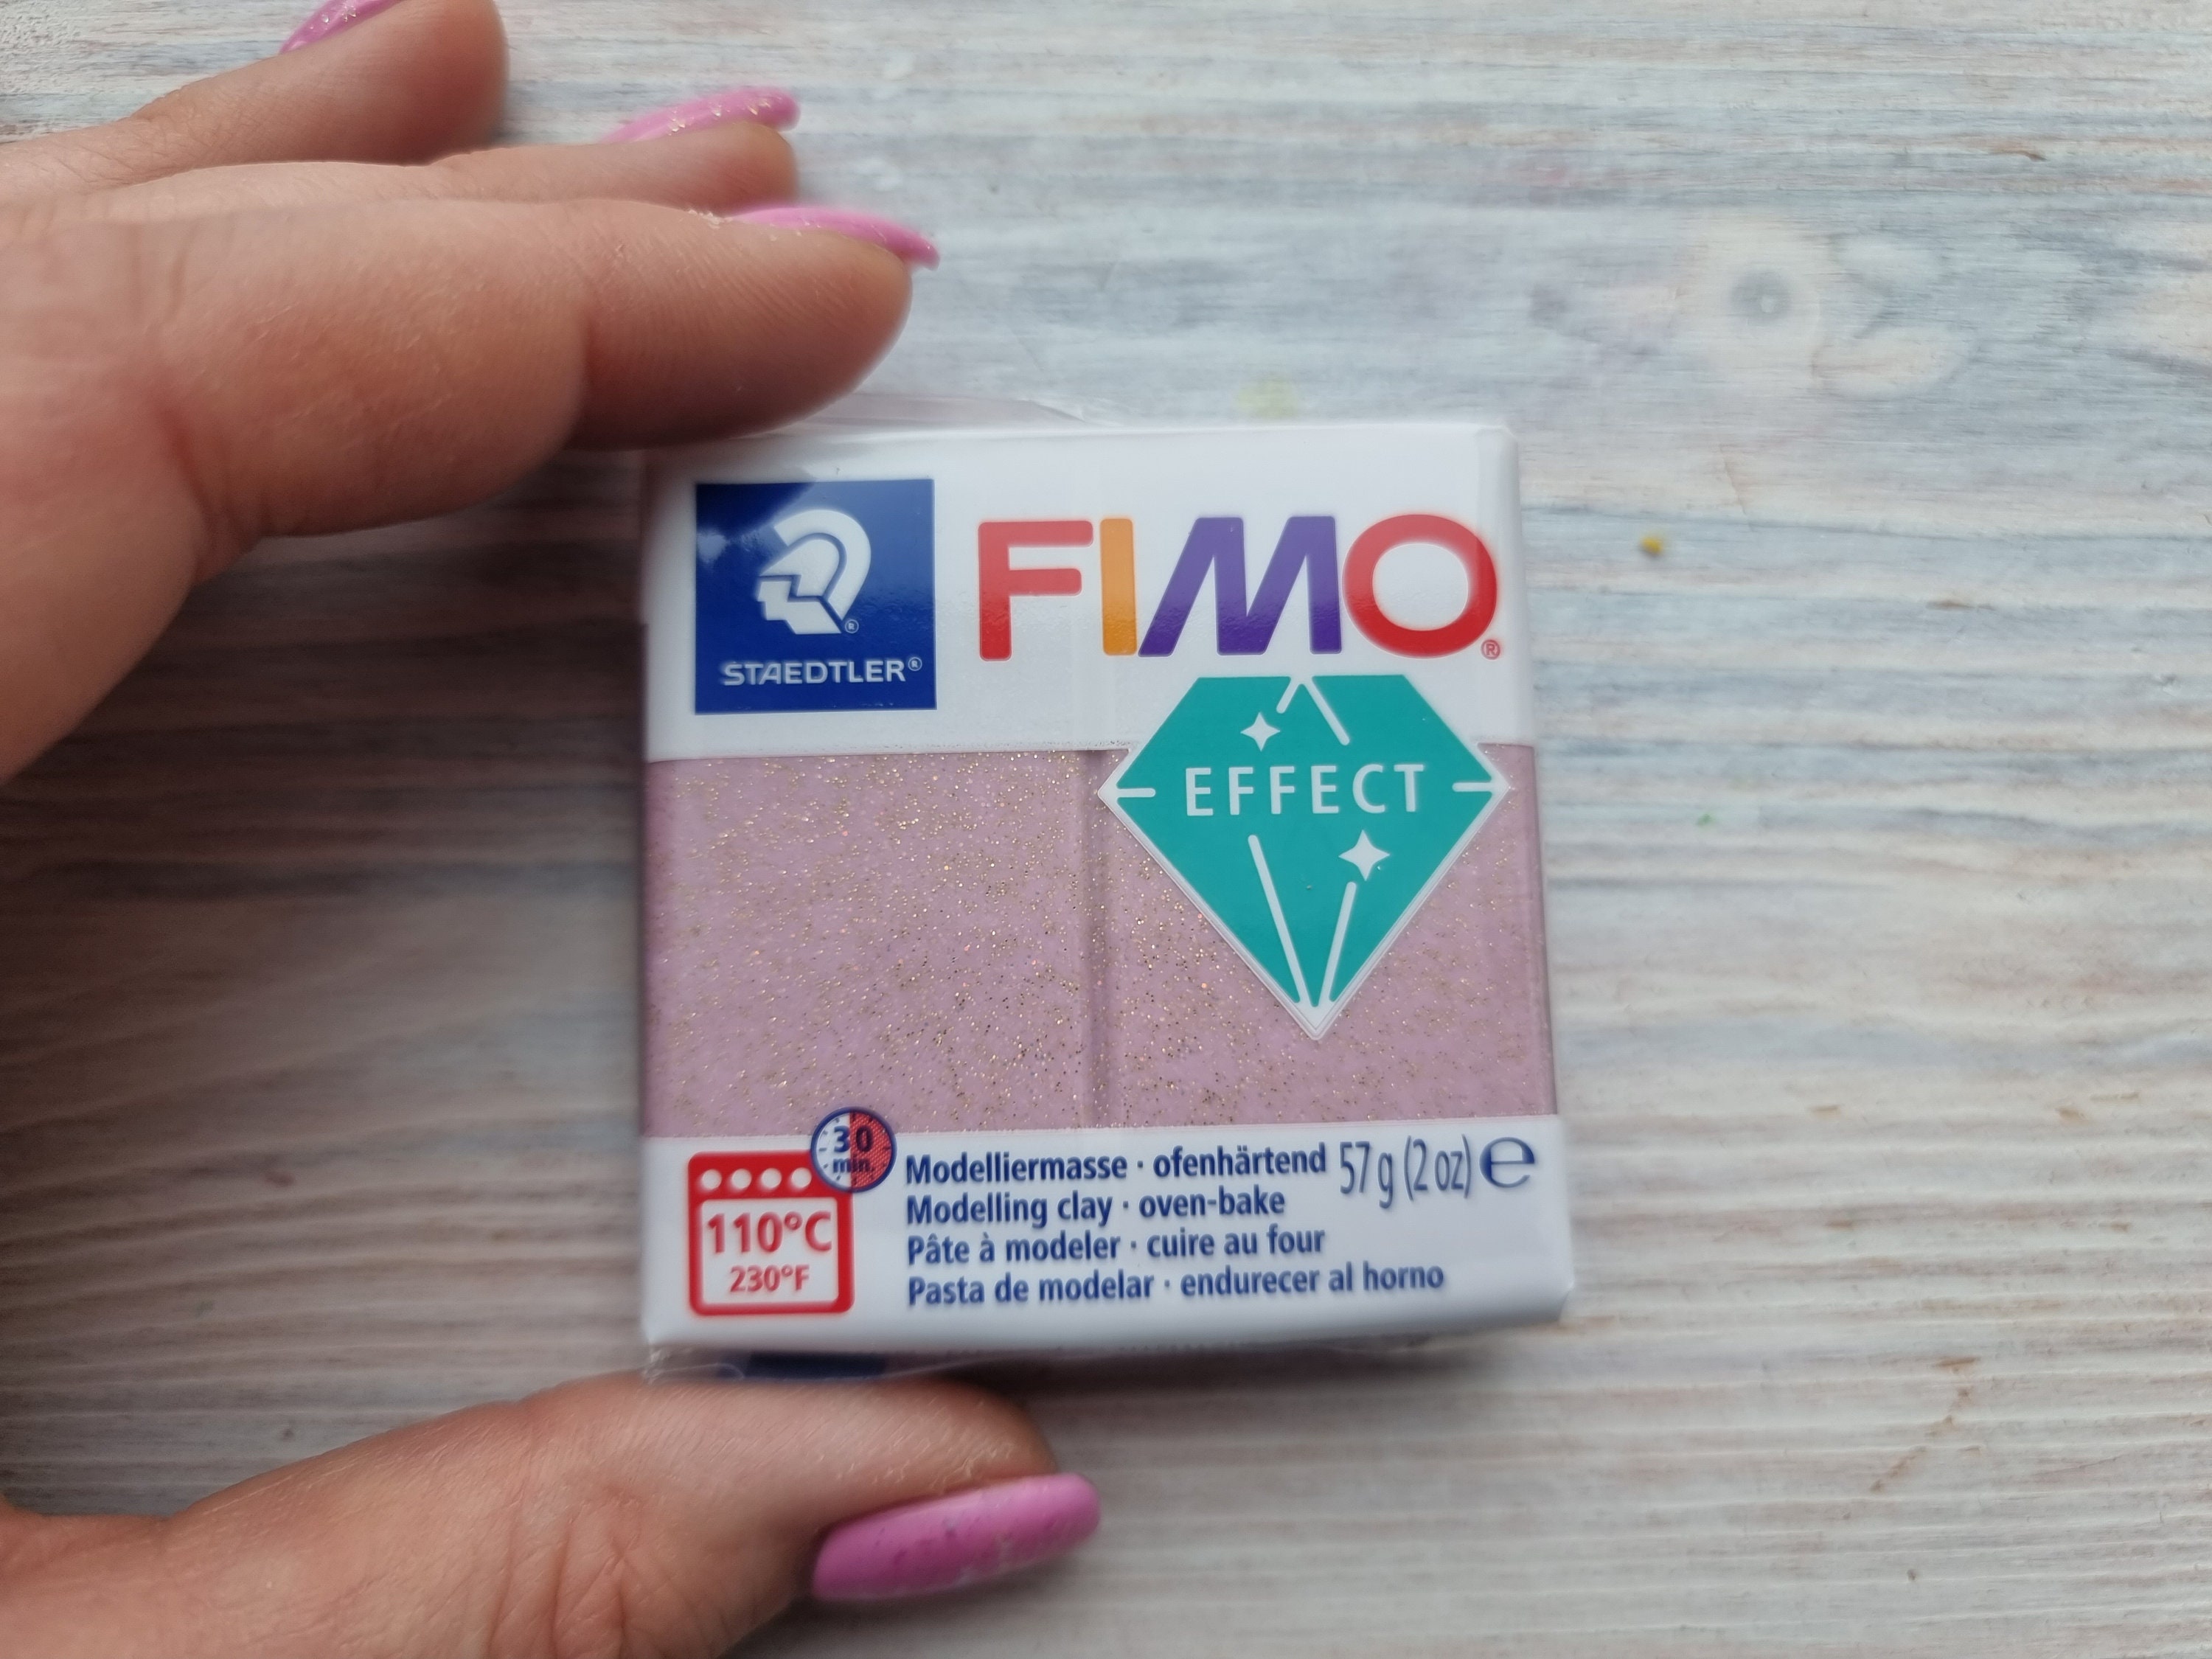 Fimo Effect Glitter Serie Polymer Clay, White glitter, Nr. 052,  57g2oz,oven-hardening Polymer Modeling Clay, Glitter Effect by STAEDTLER 